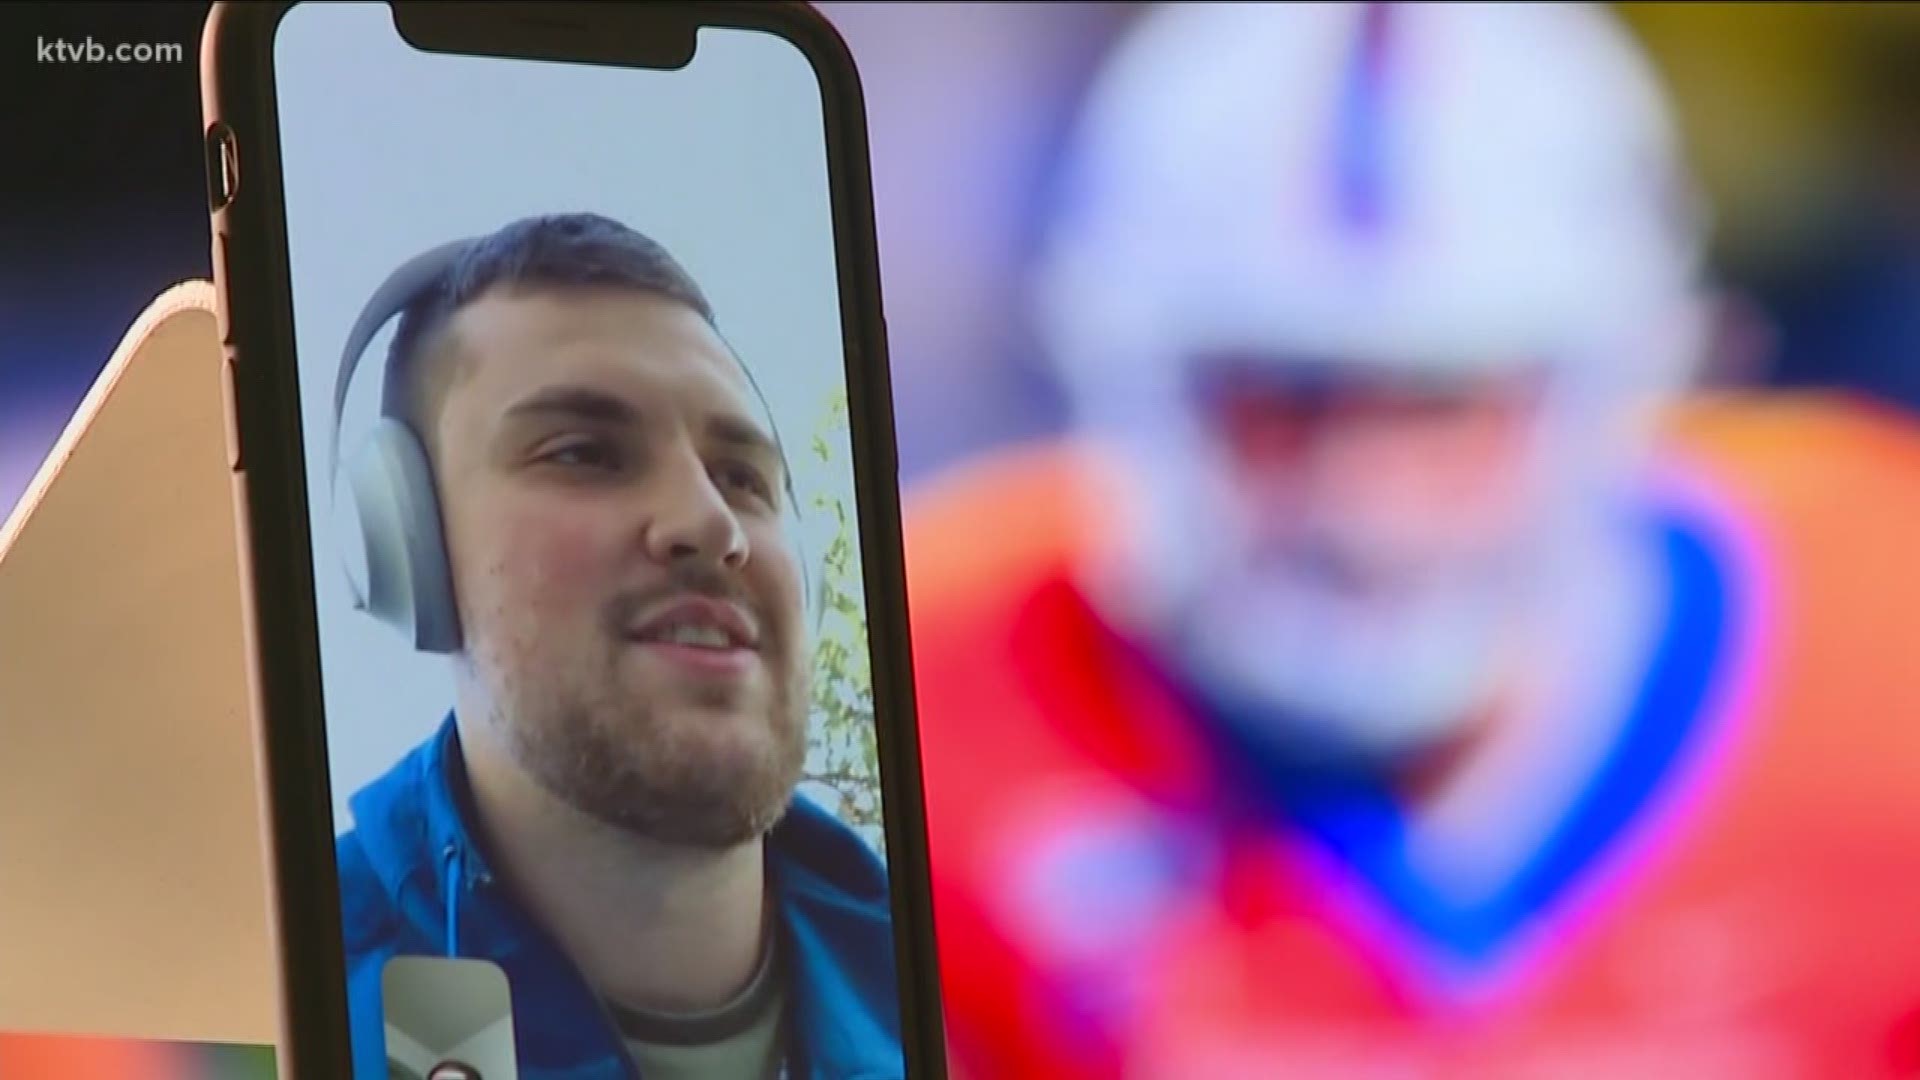 KTVB Sports Director Jay Tust catches up with former Bronco O-lineman Ezra Cleveland a day before the NFL draft gets underway.